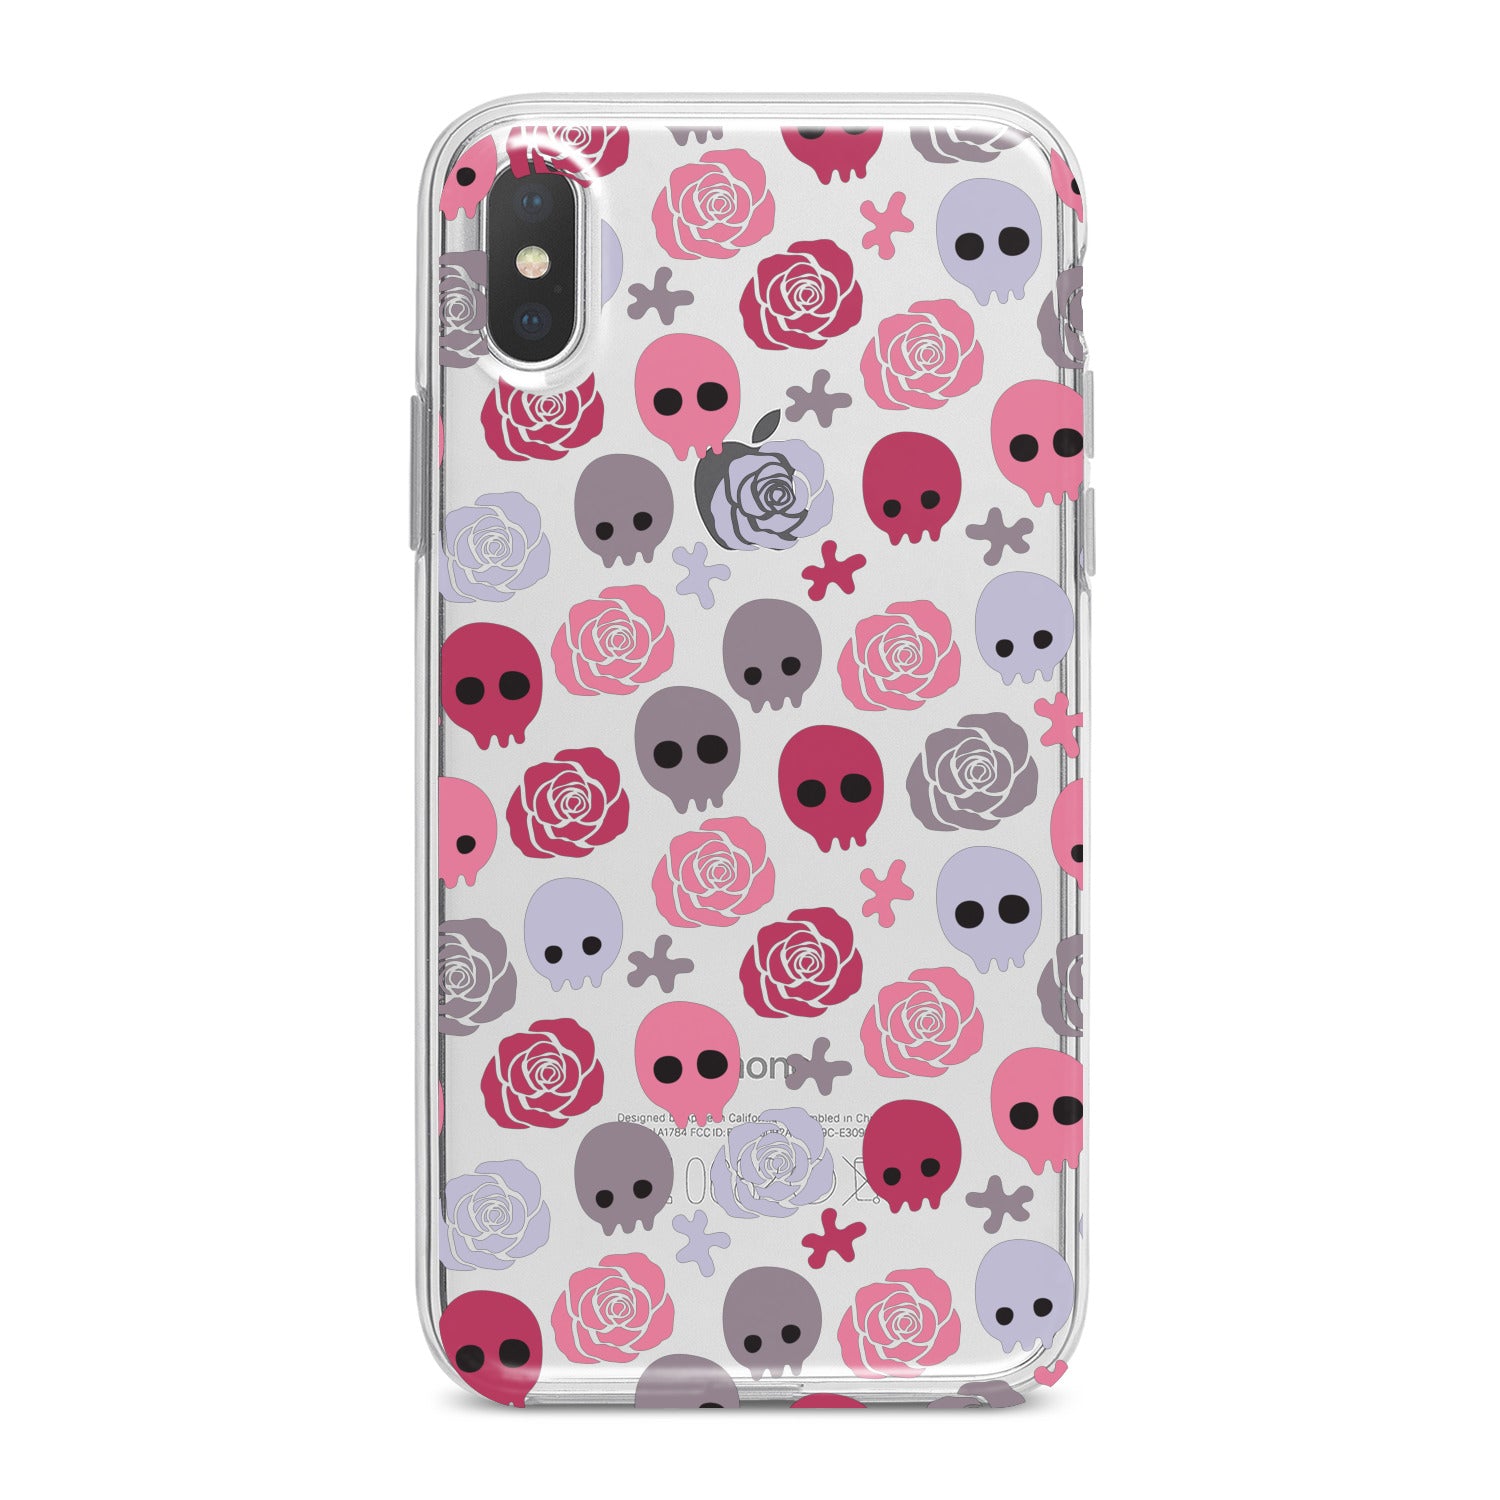 Lex Altern Floral Skulls Phone Case for your iPhone & Android phone.